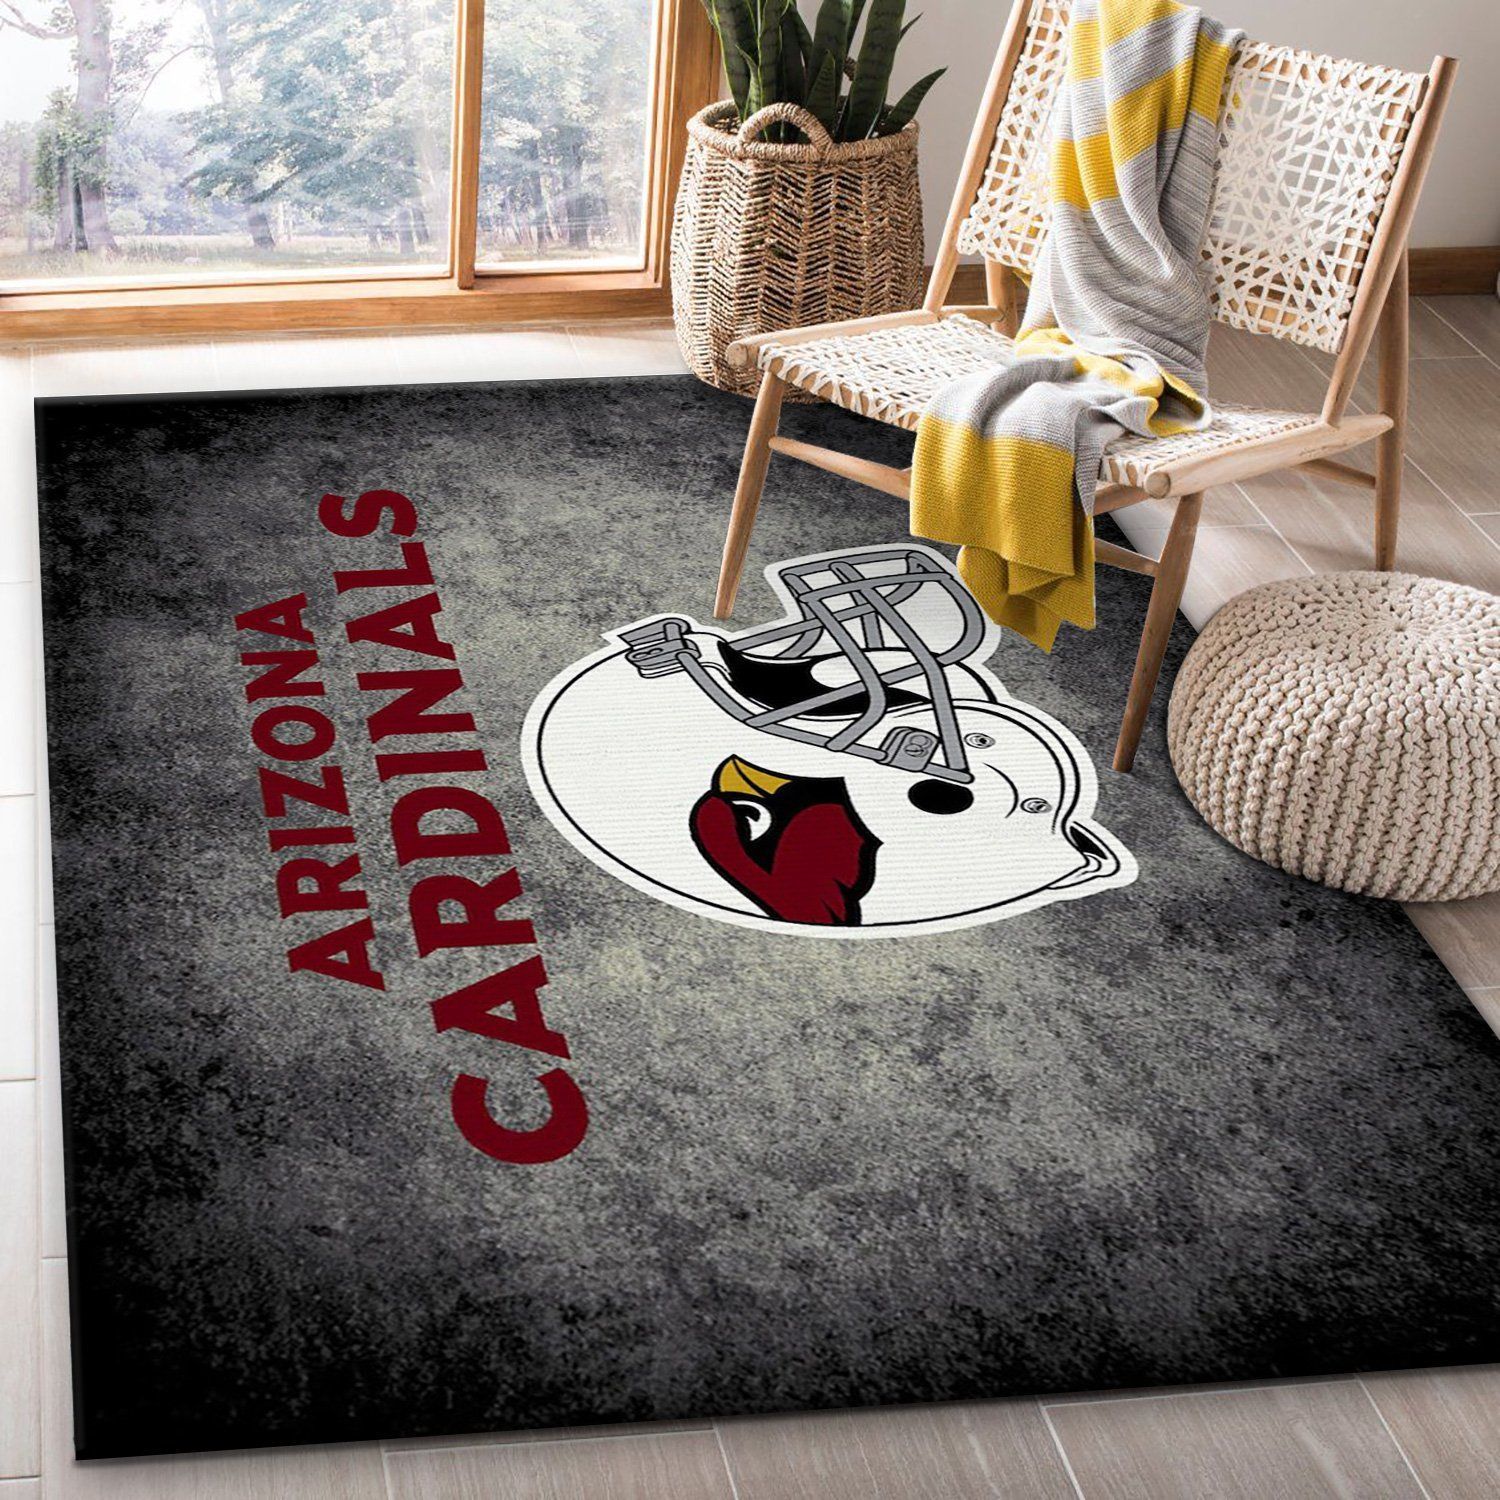 Arizona Cardinals Imperial Distressed Rug NFL Team Logos Area Rug, Living room and bedroom Rug, US Gift Decor - Indoor Outdoor Rugs 2